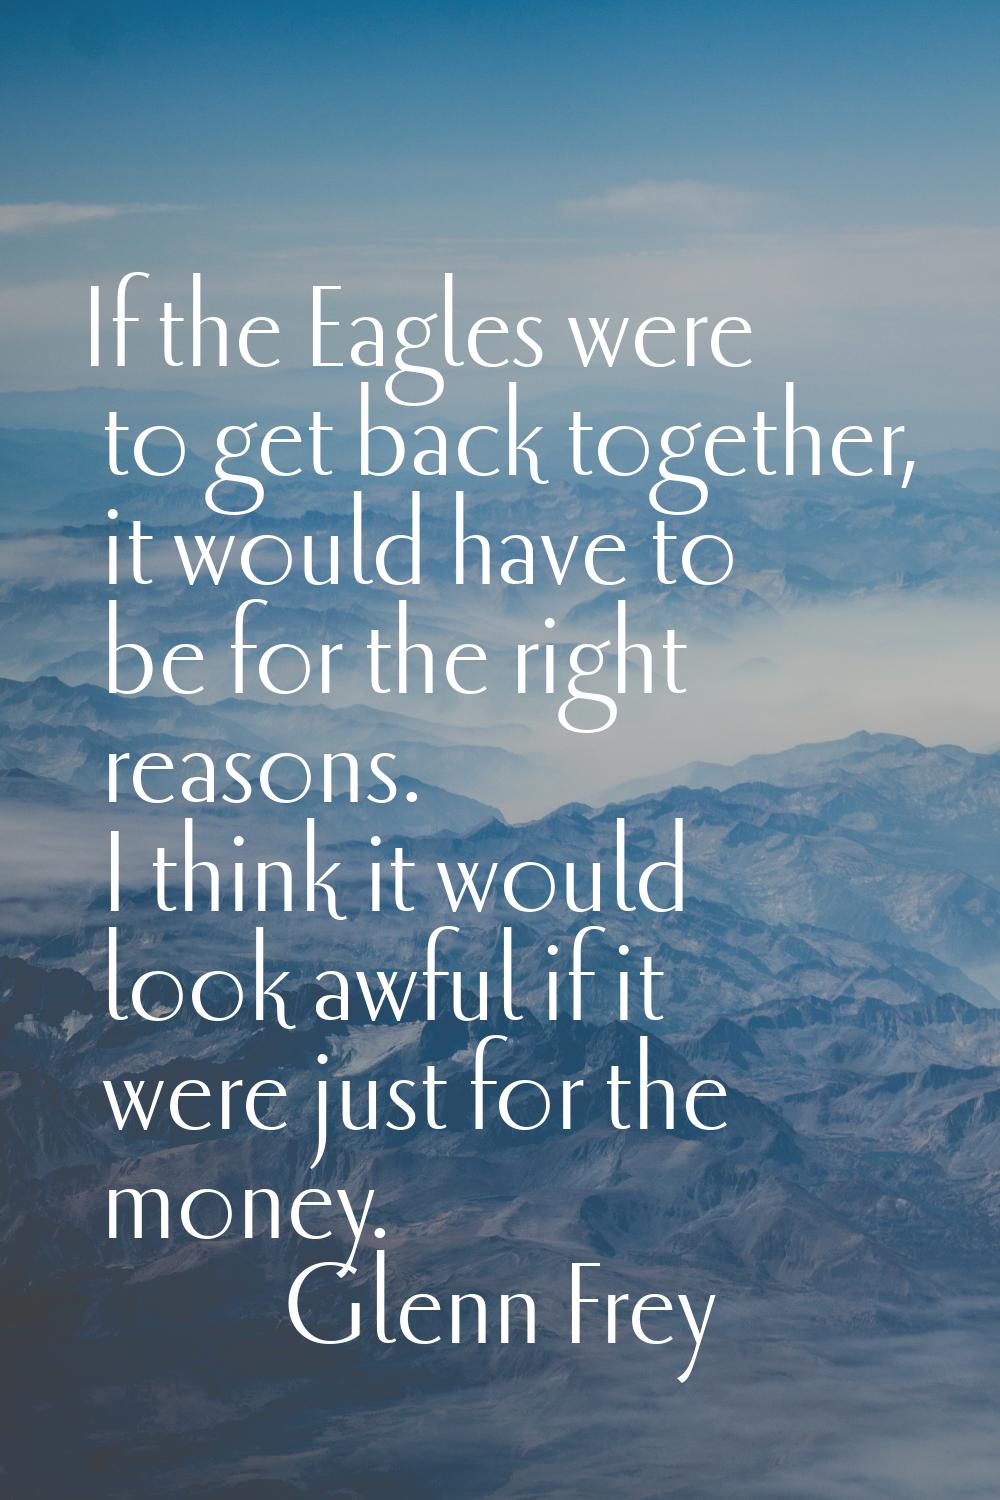 If the Eagles were to get back together, it would have to be for the right reasons. I think it woul